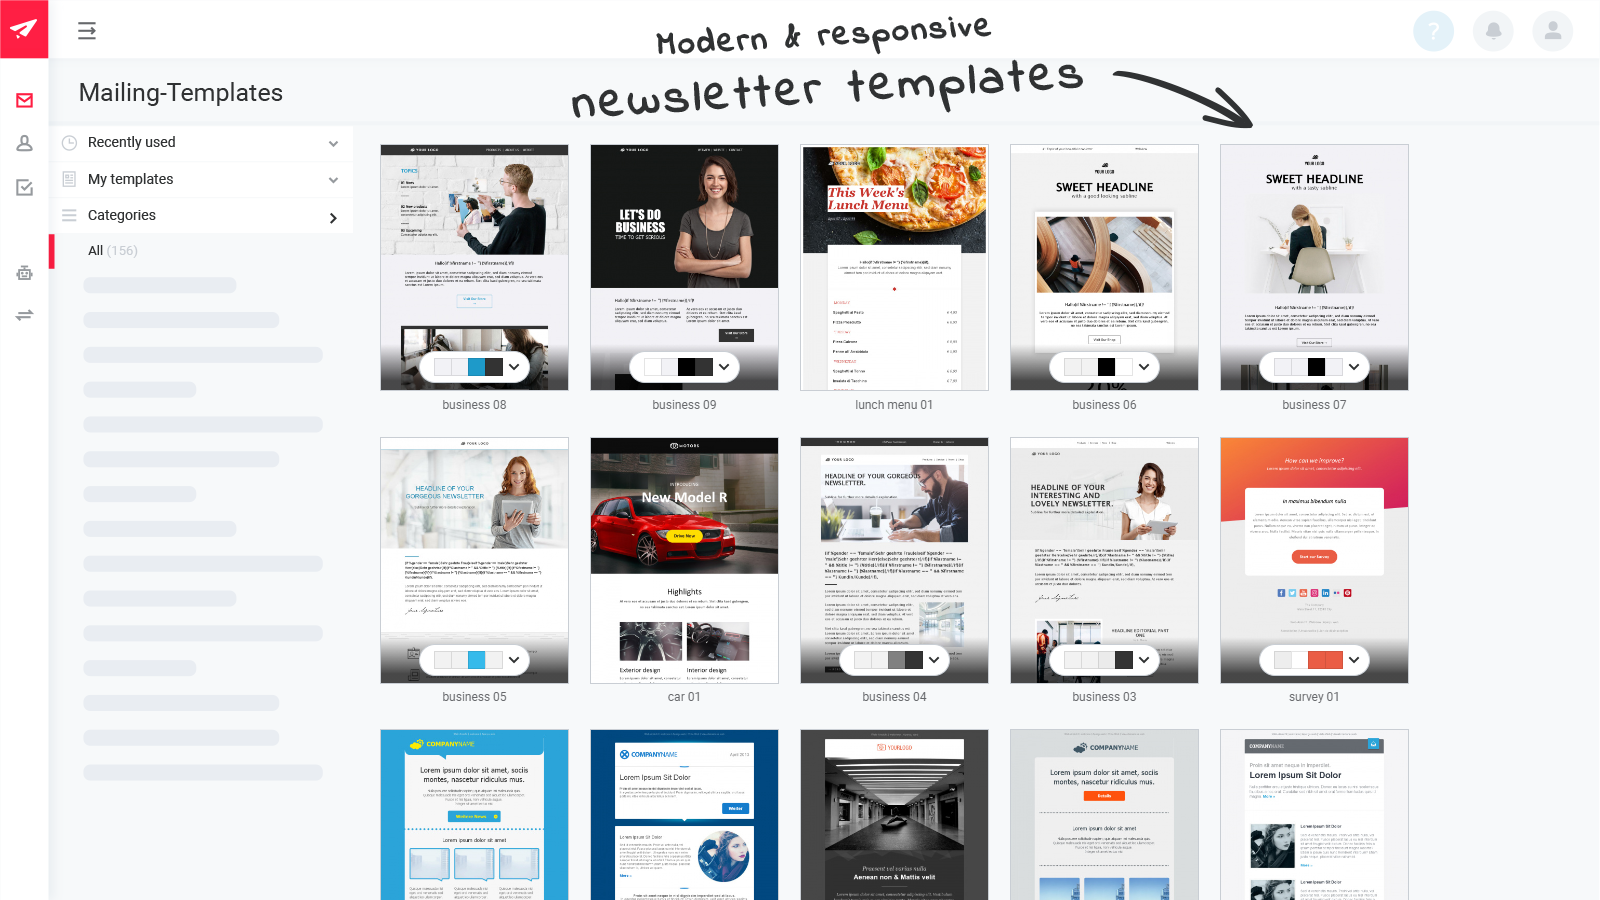 Use over 250 free newsletter templates for any occasion and a variety of industries - get inspired or simply save time on newsletter creation